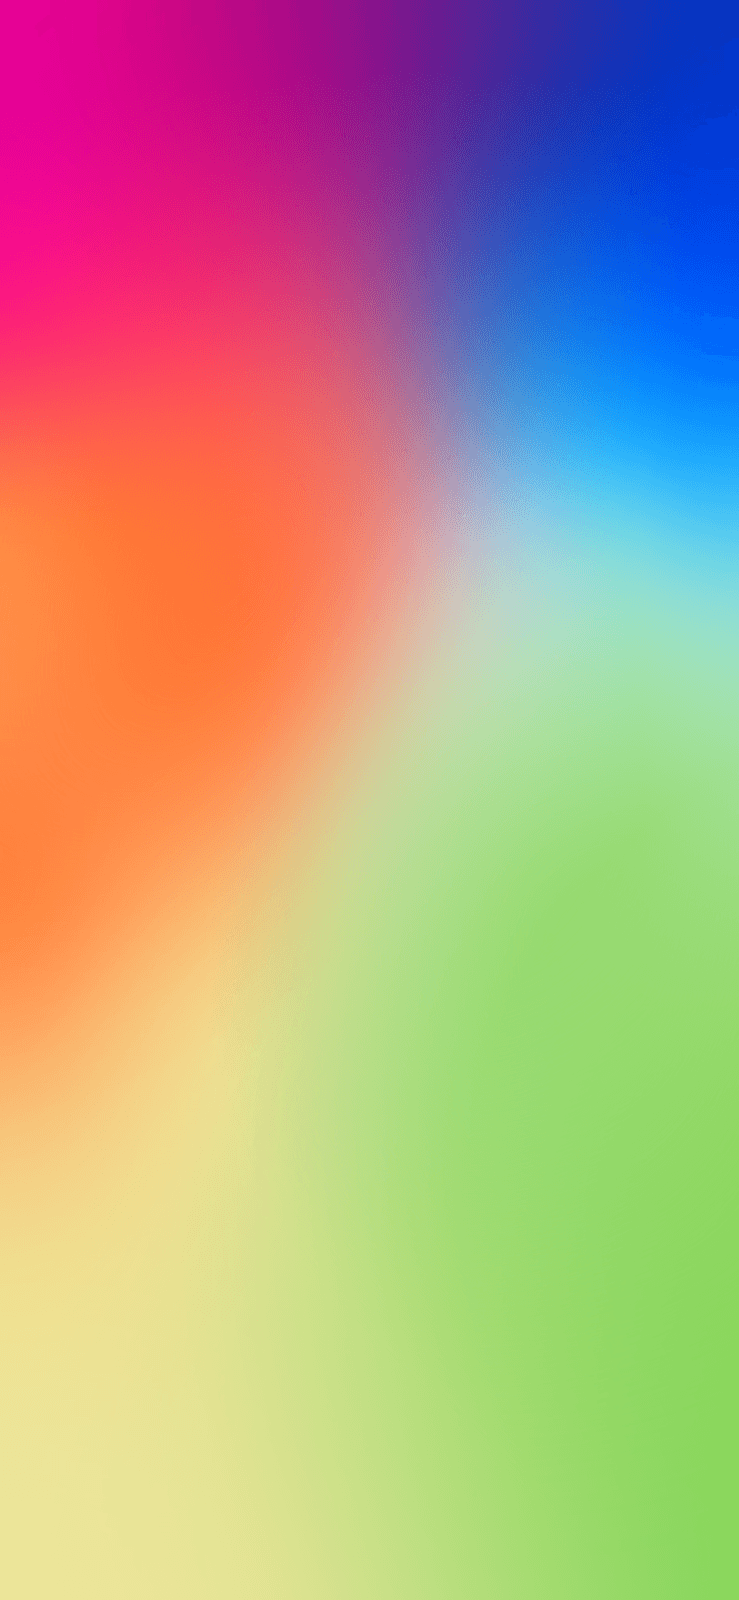 Gradient Android Wallpapers - Wallpaper Cave